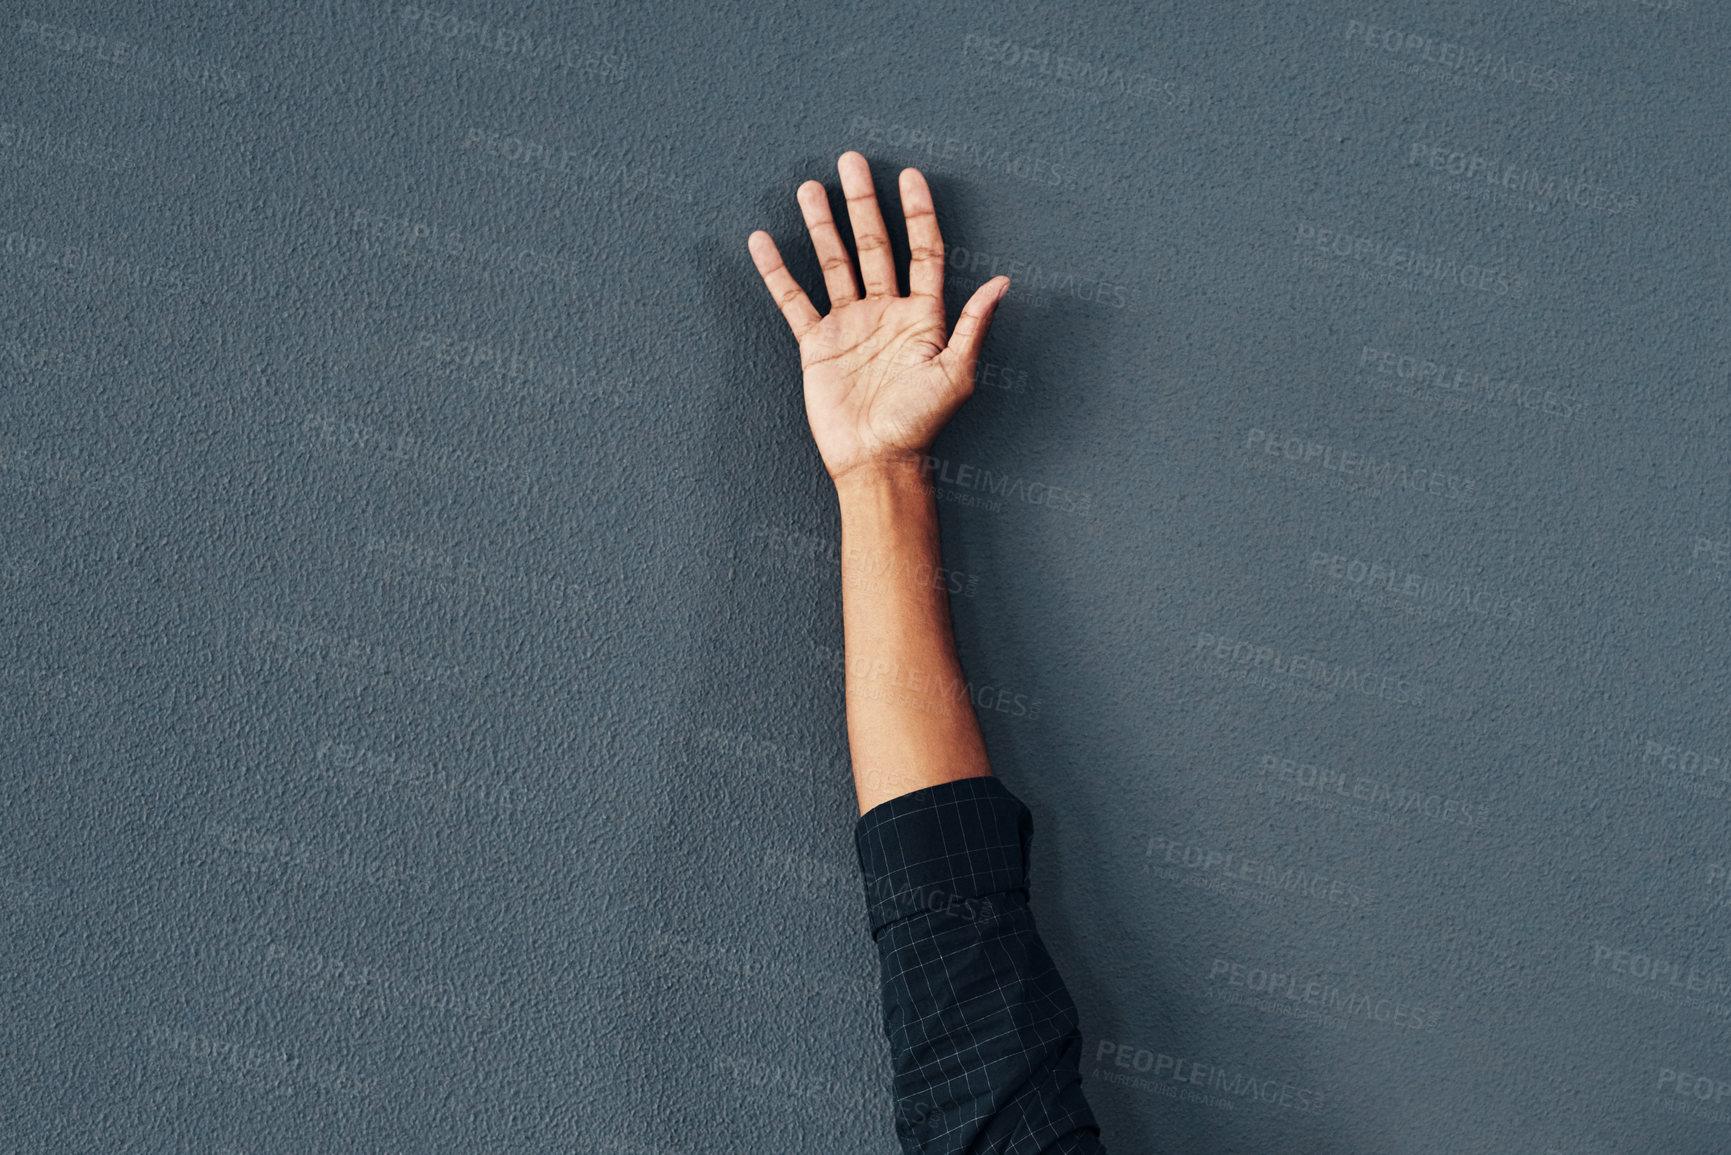 Buy stock photo Studio shot of an unrecognizable woman raising her hand against a grey background